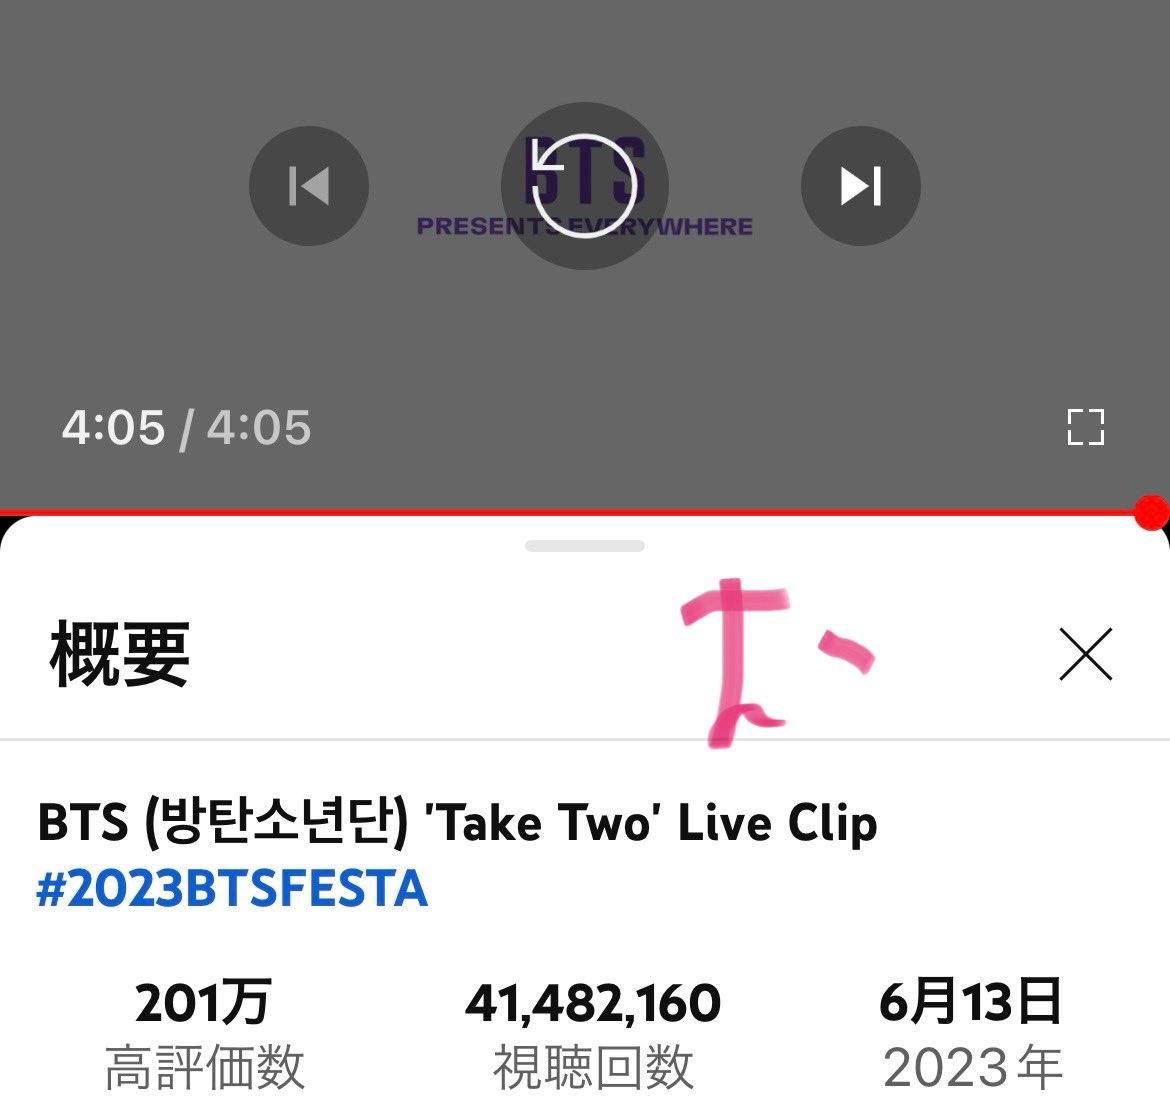 《Take Two》
7人をずっとずっと待ってます
(୨୧ ❛ᴗ❛)✧💜💜💜💜💜💜💜

BTS (방탄소년단) 'Take Two' Live Clip #2023BTSFESTA youtu.be/owjVpYCmwcg?si… @YouTubeより